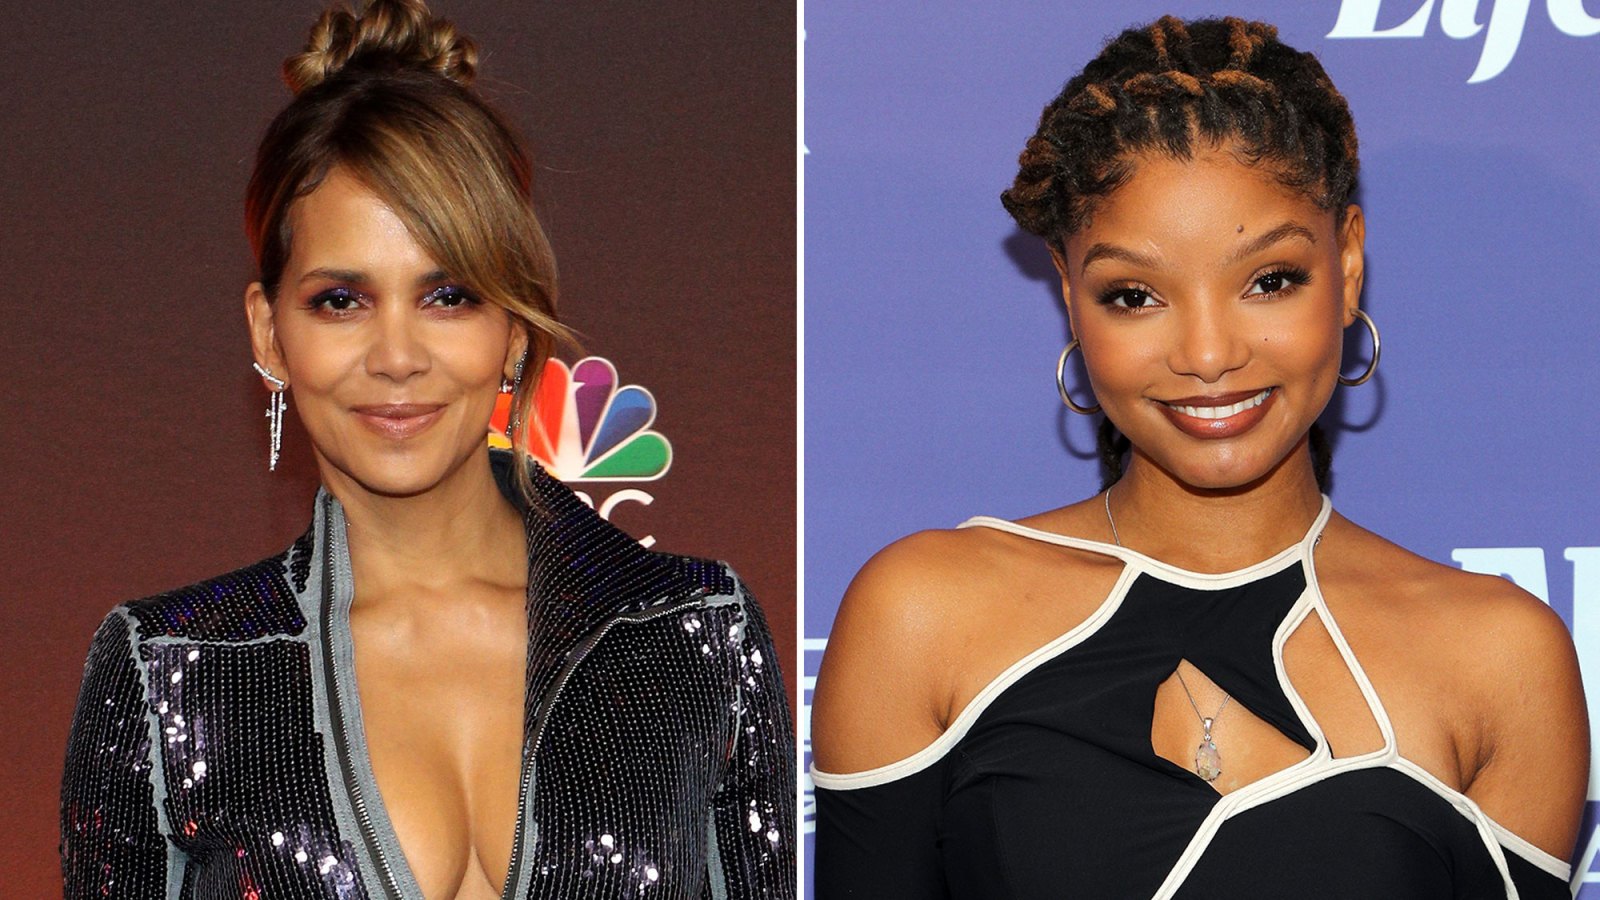 Halle Berry Jokes About Being Mistaken for Little Mermaid's Halle Bailey, Reveals She’s a Fan of Disney’s Newest Star